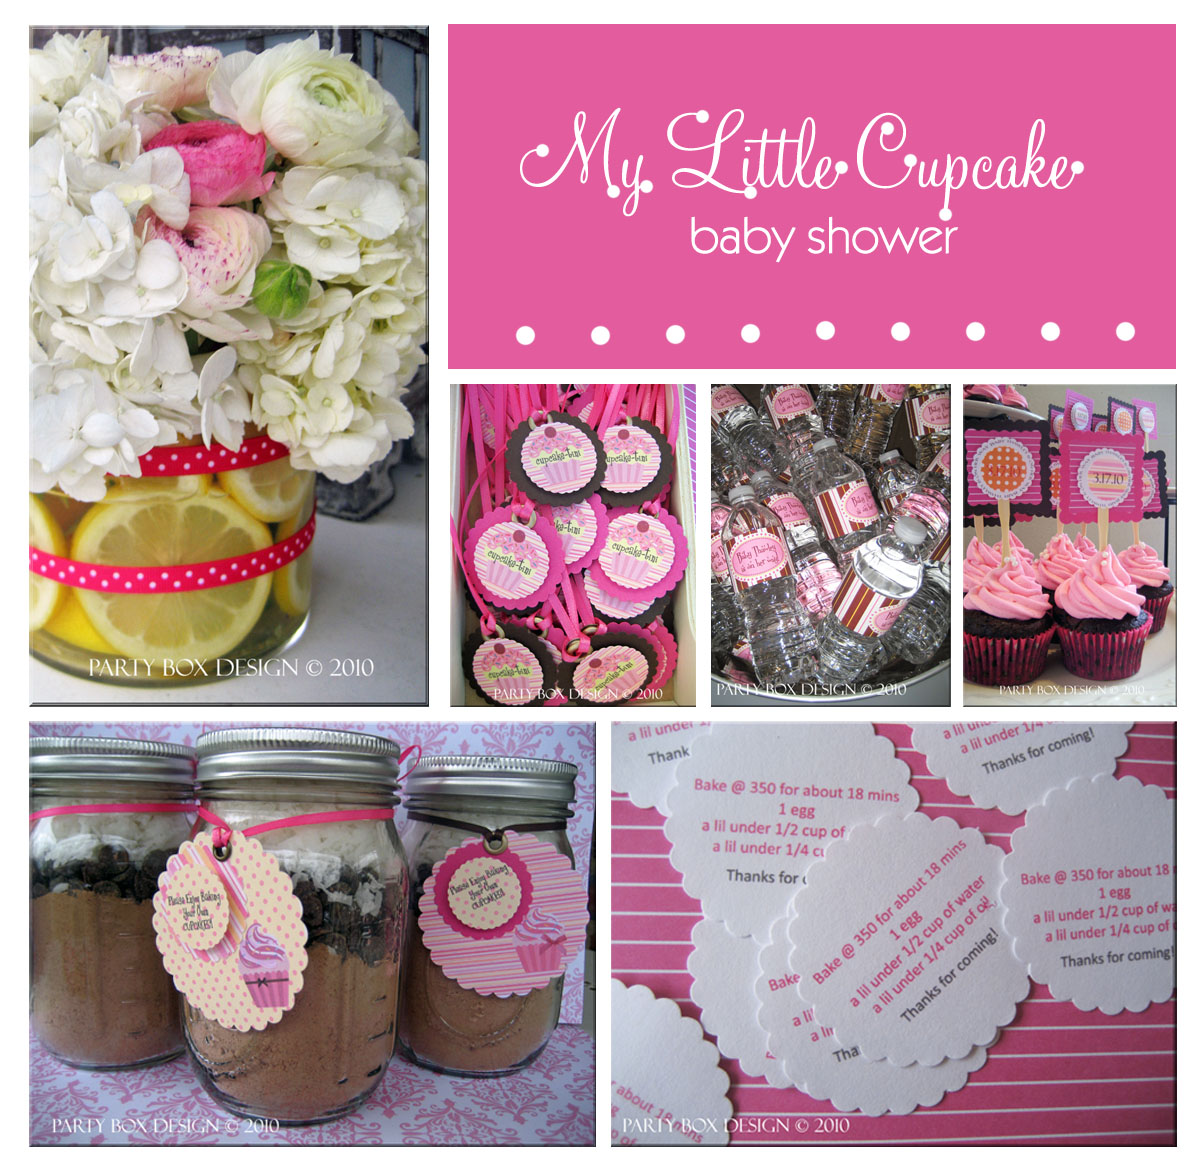 Five fabulous baby shower ideas and themes - Skip To My Lou Skip To My